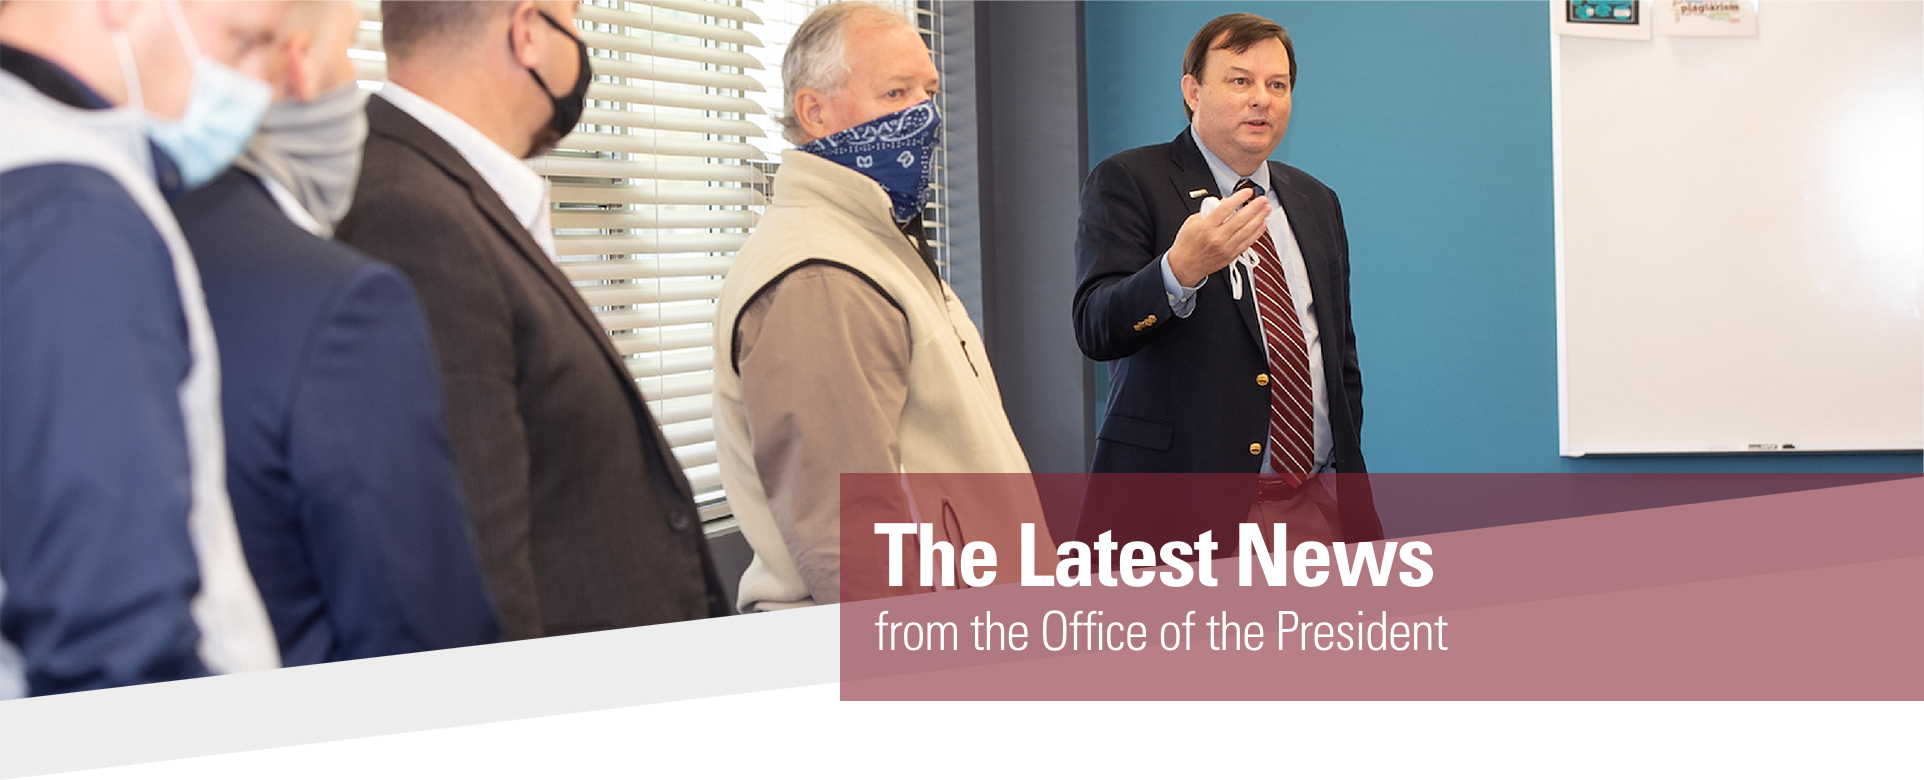 The Latest News from the Office of the President